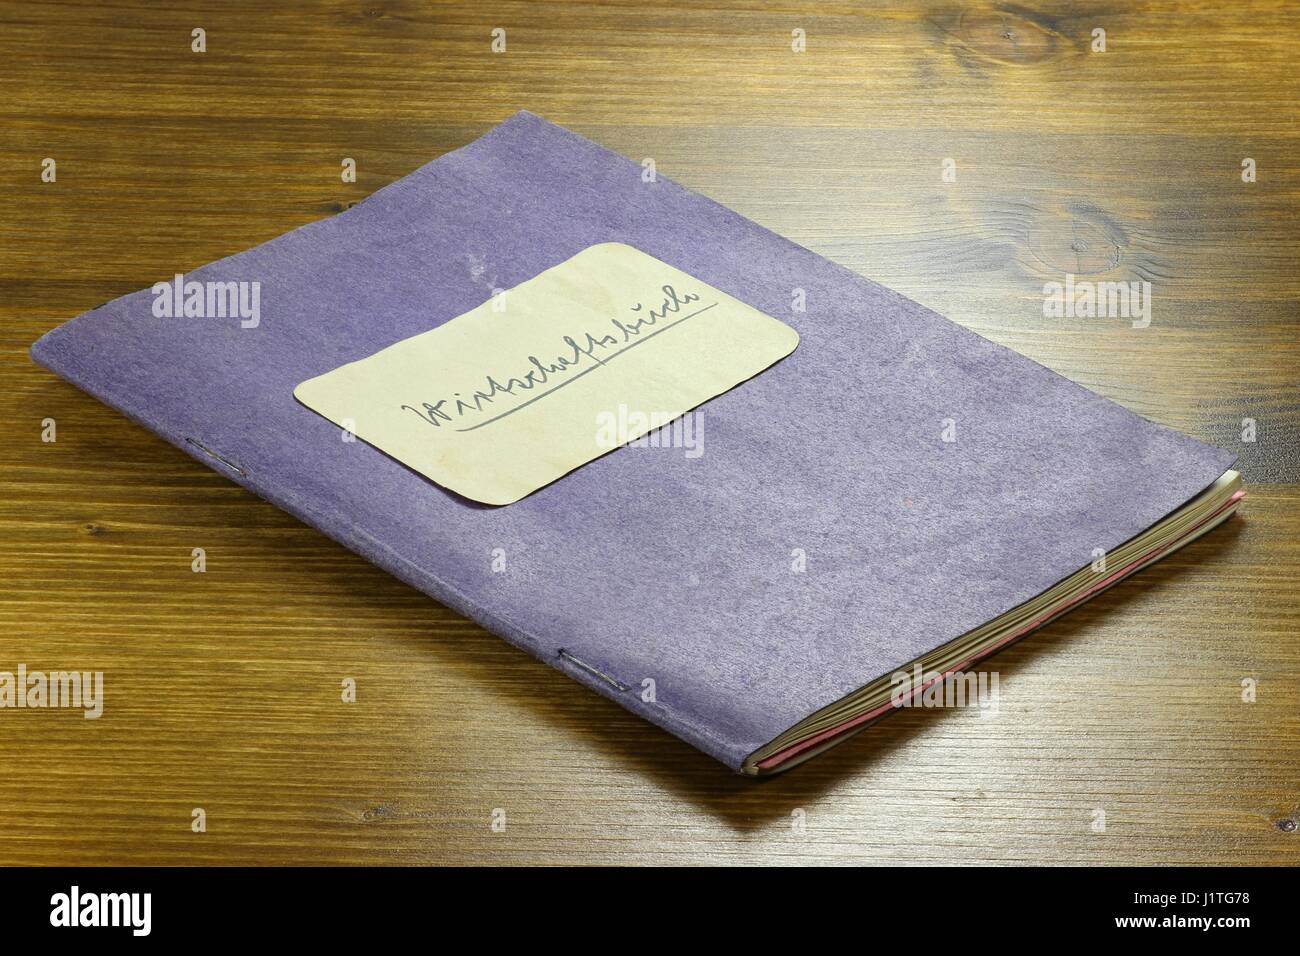 old German housekeeping book on wooden background Stock Photo